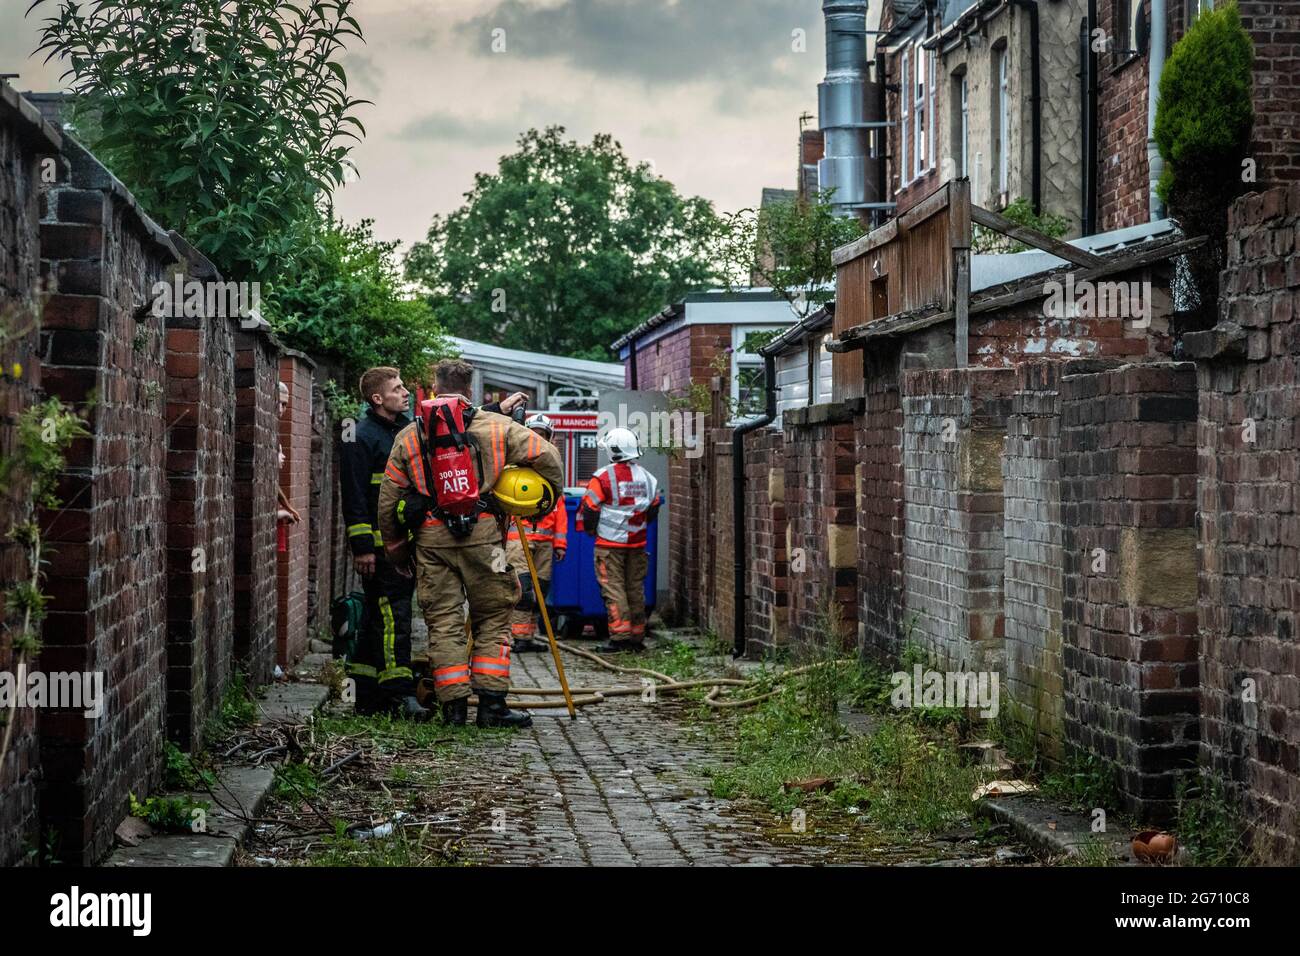 Manchester, UK. 09th July, 2021. Fire fighters seen in an rear alley to stop the house fire in Failsworth.Greater Manchester Fire Service block off Norman Street, Failsworth after a house fire in a flat on Manchester Road. Residents say the house fire was caused by a man who wanted to commit suicide however conflicting reports also came me that the man was cooking. Two fire trucks and a fire commander responded to the scene. (Photo by Ryan Jenkinson/SOPA Images/Sipa USA) Credit: Sipa USA/Alamy Live News Stock Photo